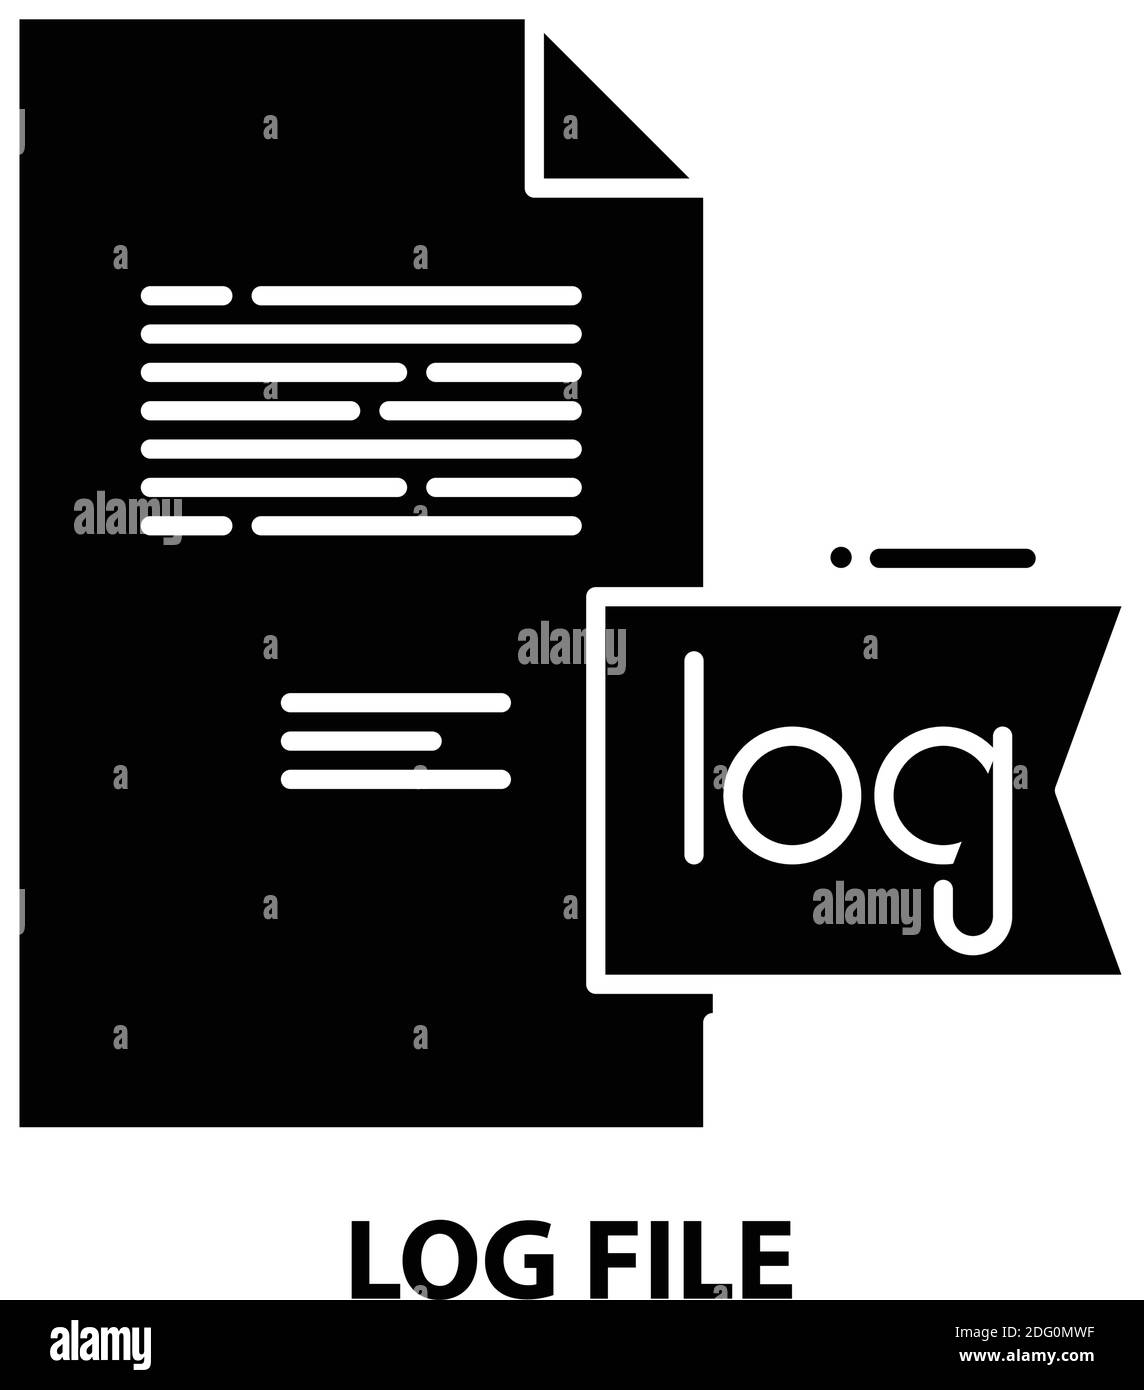 log file icon, black vector sign with editable strokes, concept ...